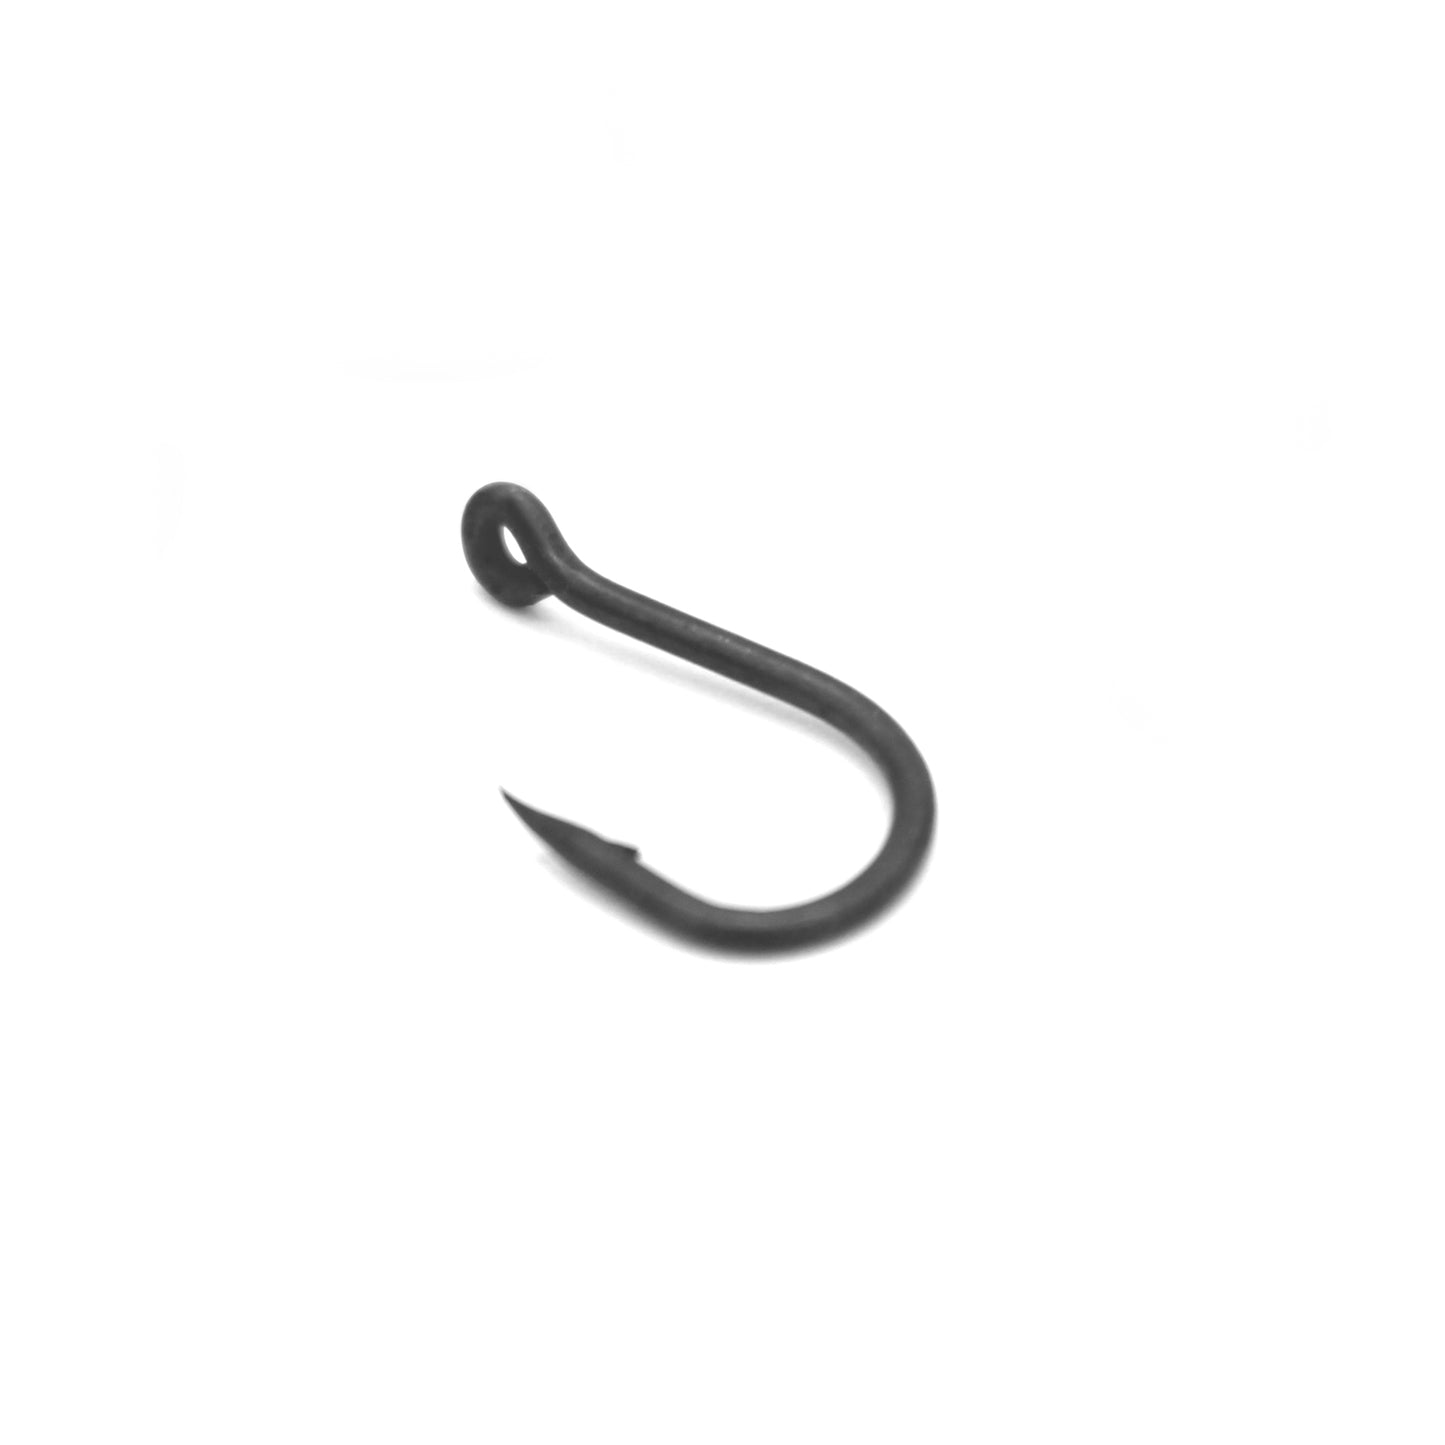 Deception Angling Chod Micro Barbed Fishing Hook